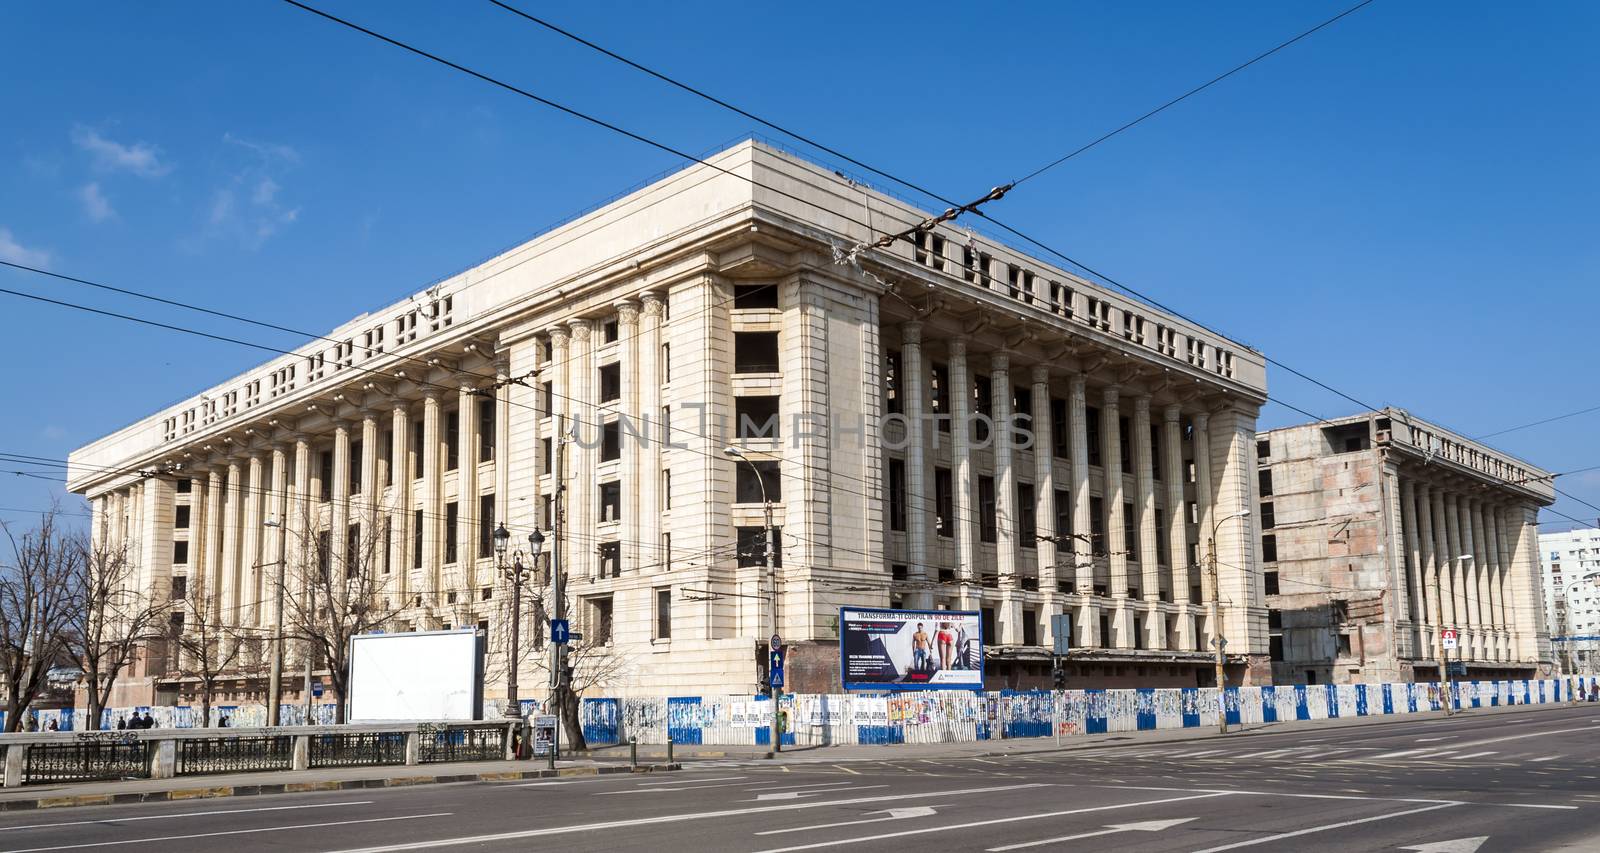 Casa Radio is a massive unfinished building, which is a legacy from the Ceausescu era. It was originally intended to be the headquarters of the national radio station.